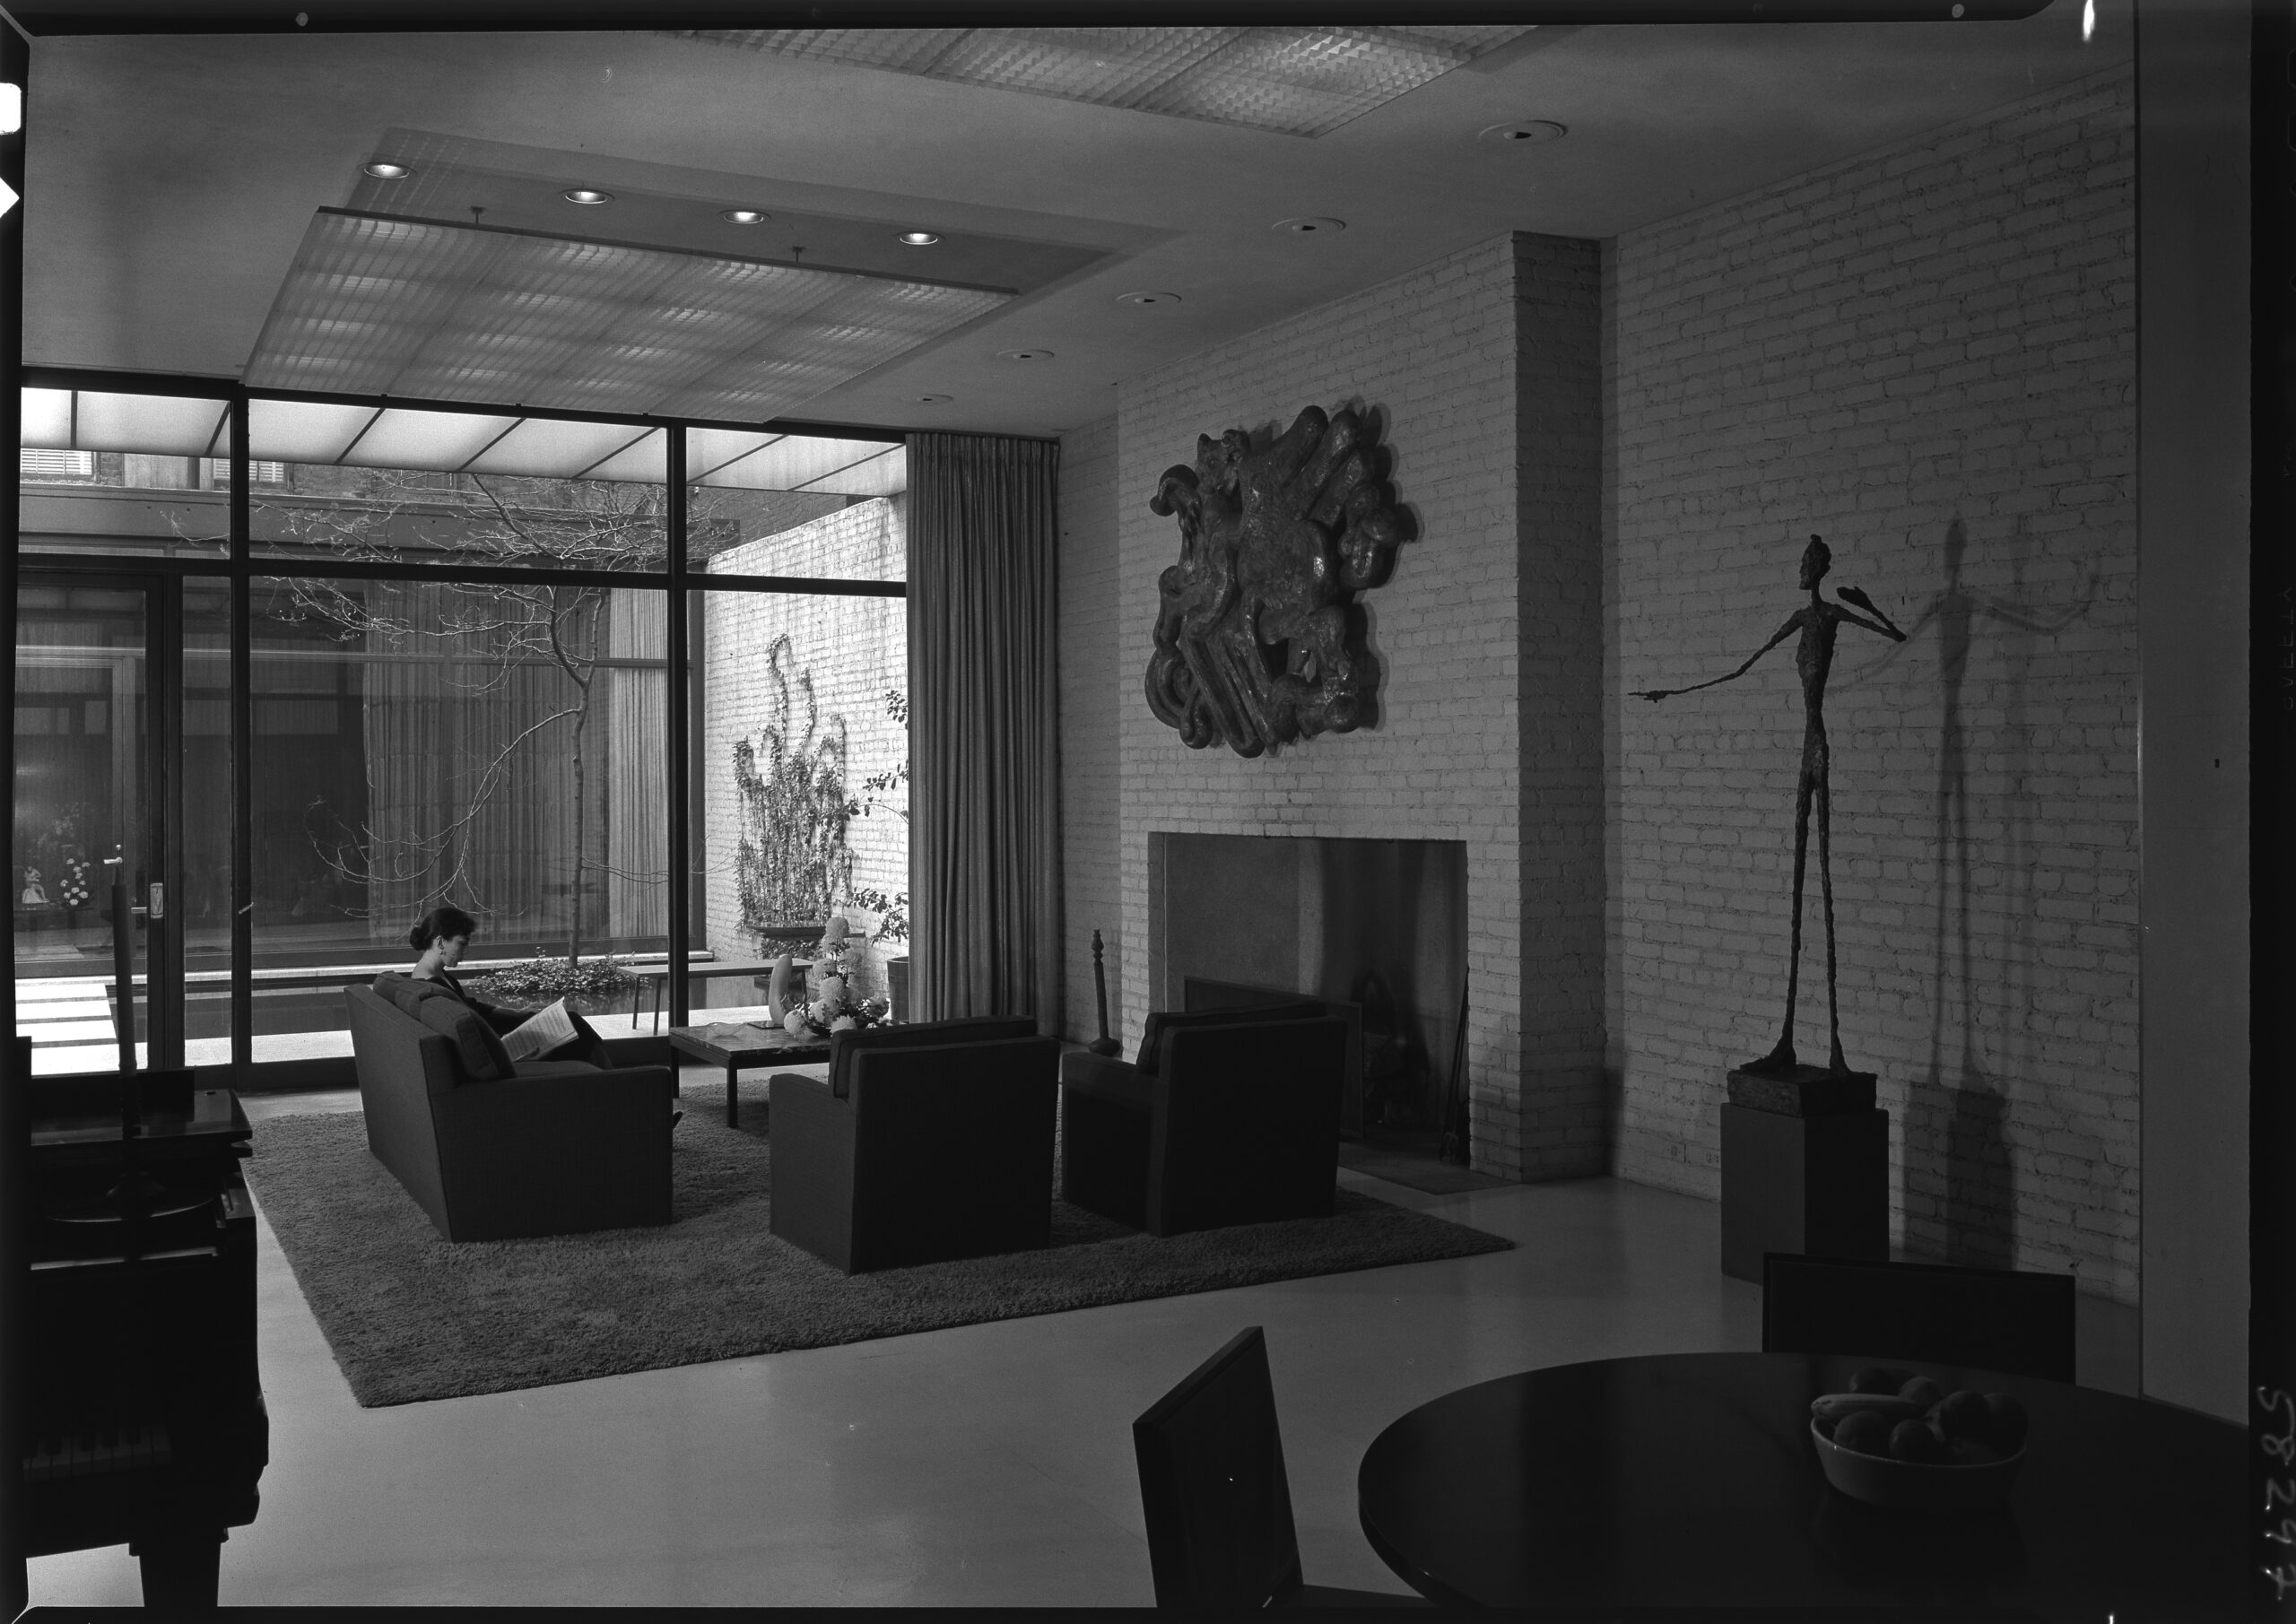 Philip Johnson with Landis Gores and Frederick C. Genz, (architects), Rockefeller Guest House, 242 East 52 Street, NYC, 1950, photo: Gottscho-Schleisner (Library of Congress)